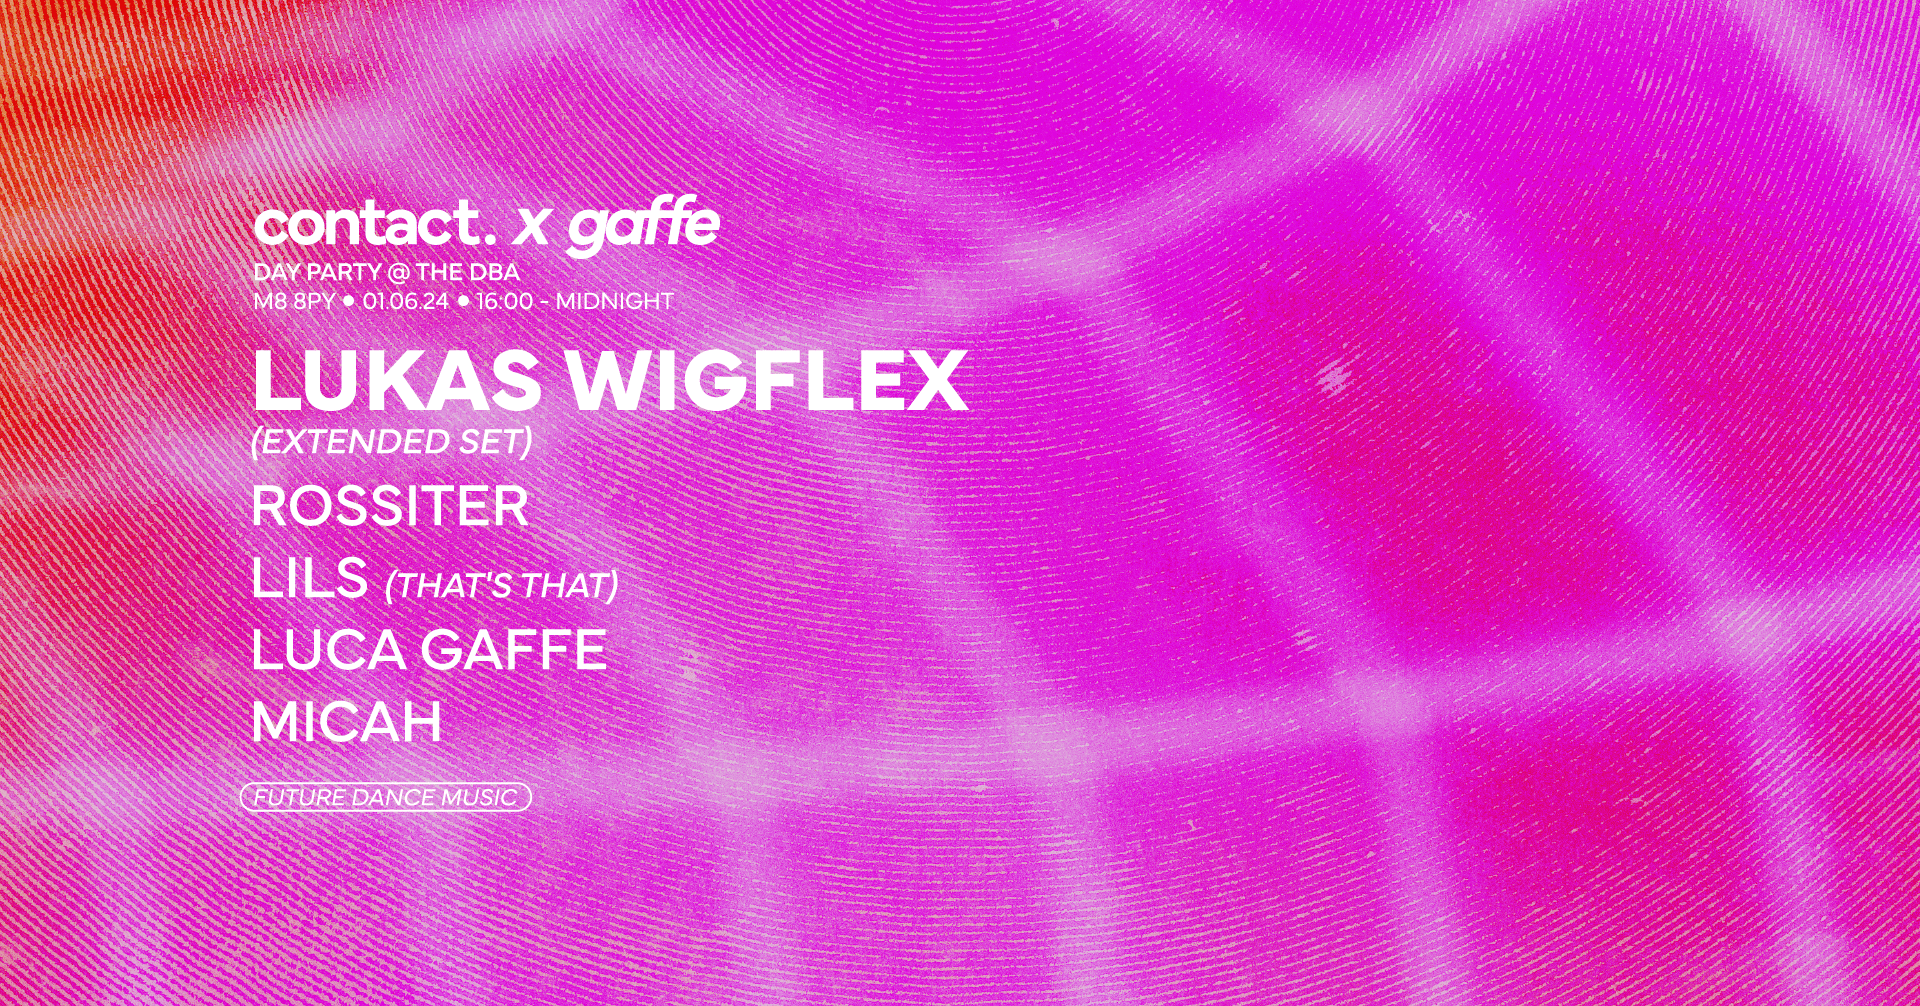 Contact x GAFFE Day Party: Lukas Wigflex + more - Página frontal